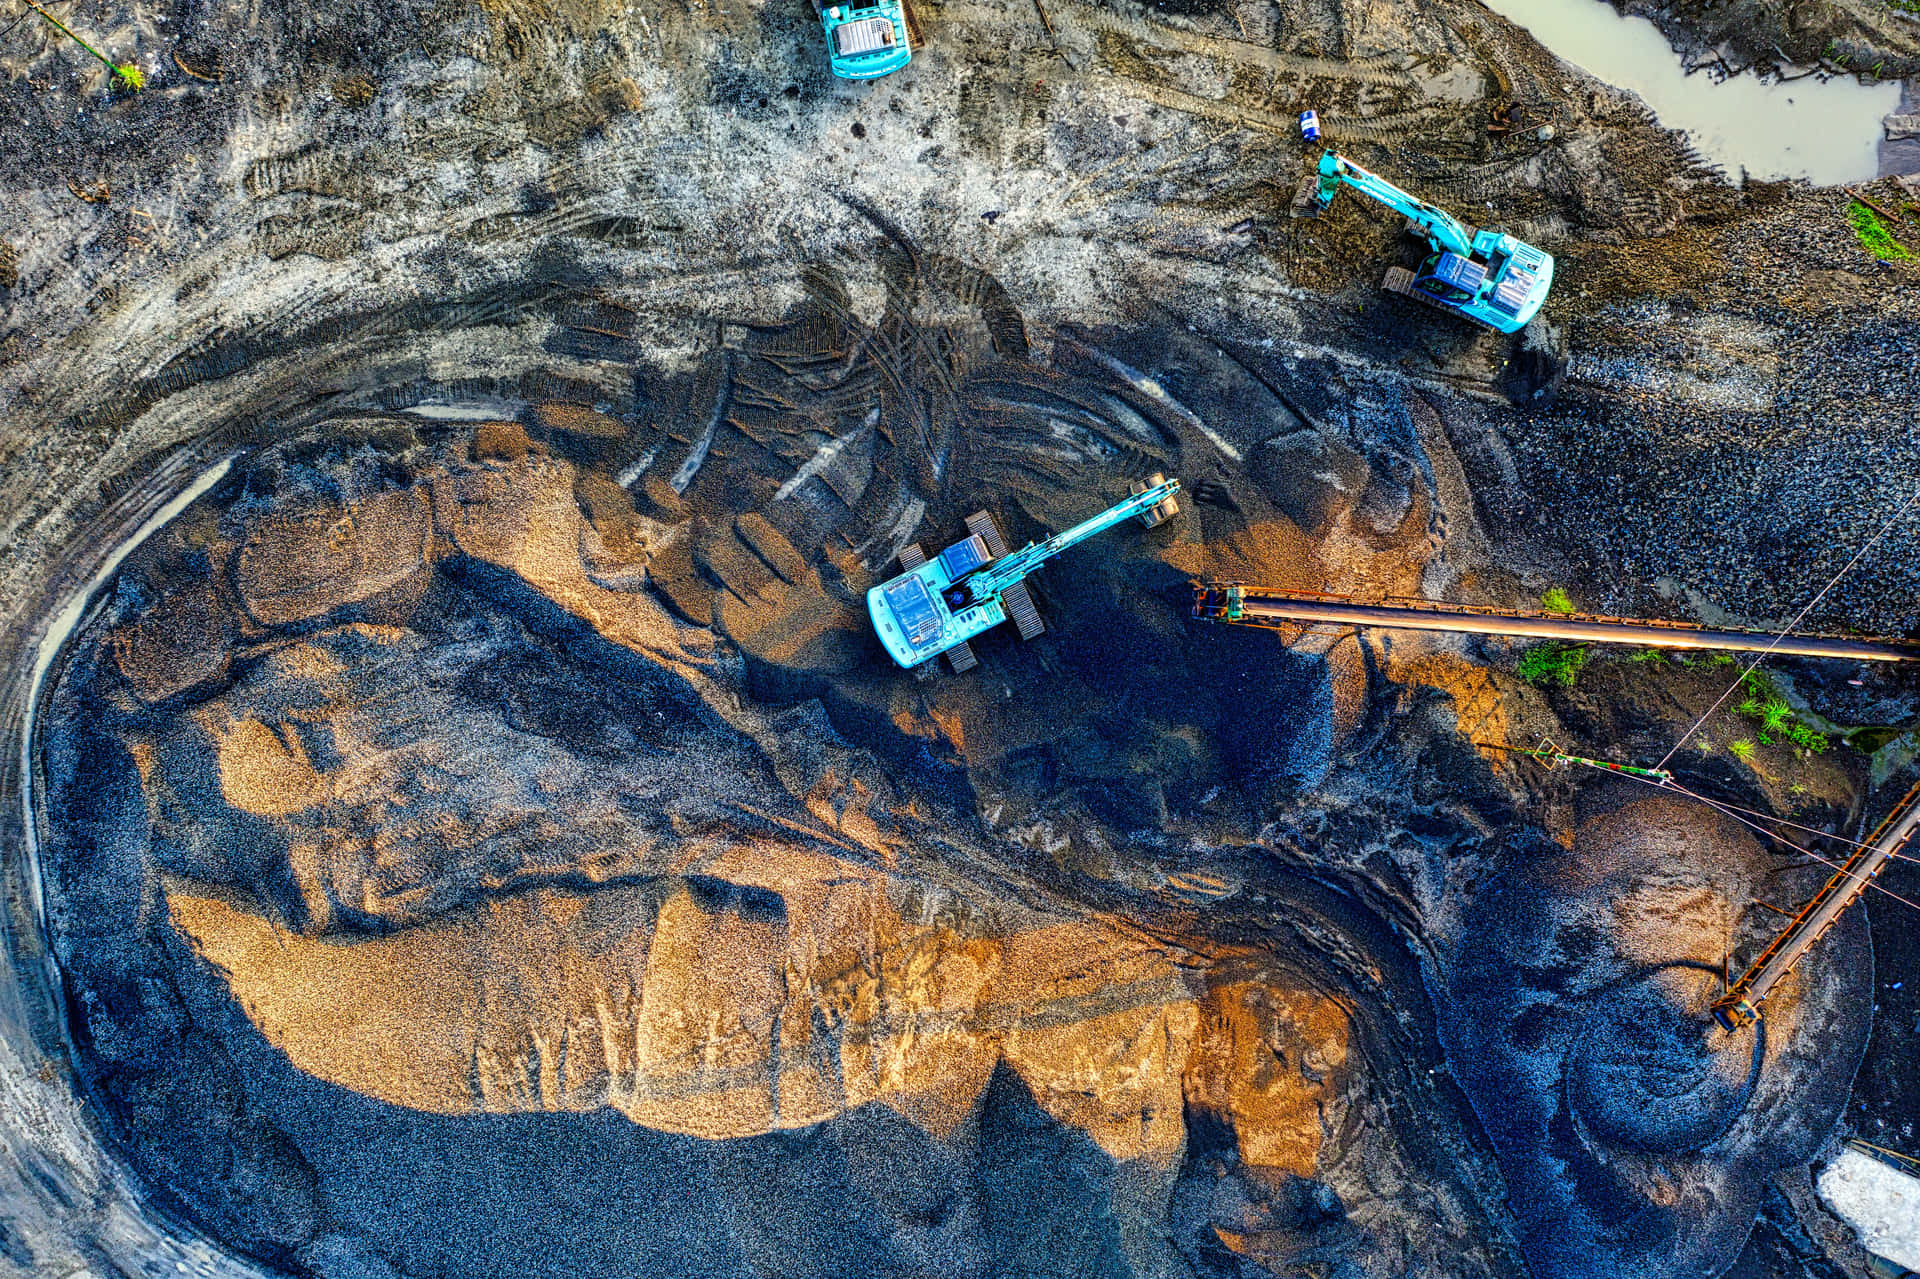 Miners in Northern Territory, Australia Extracting Precious Resources